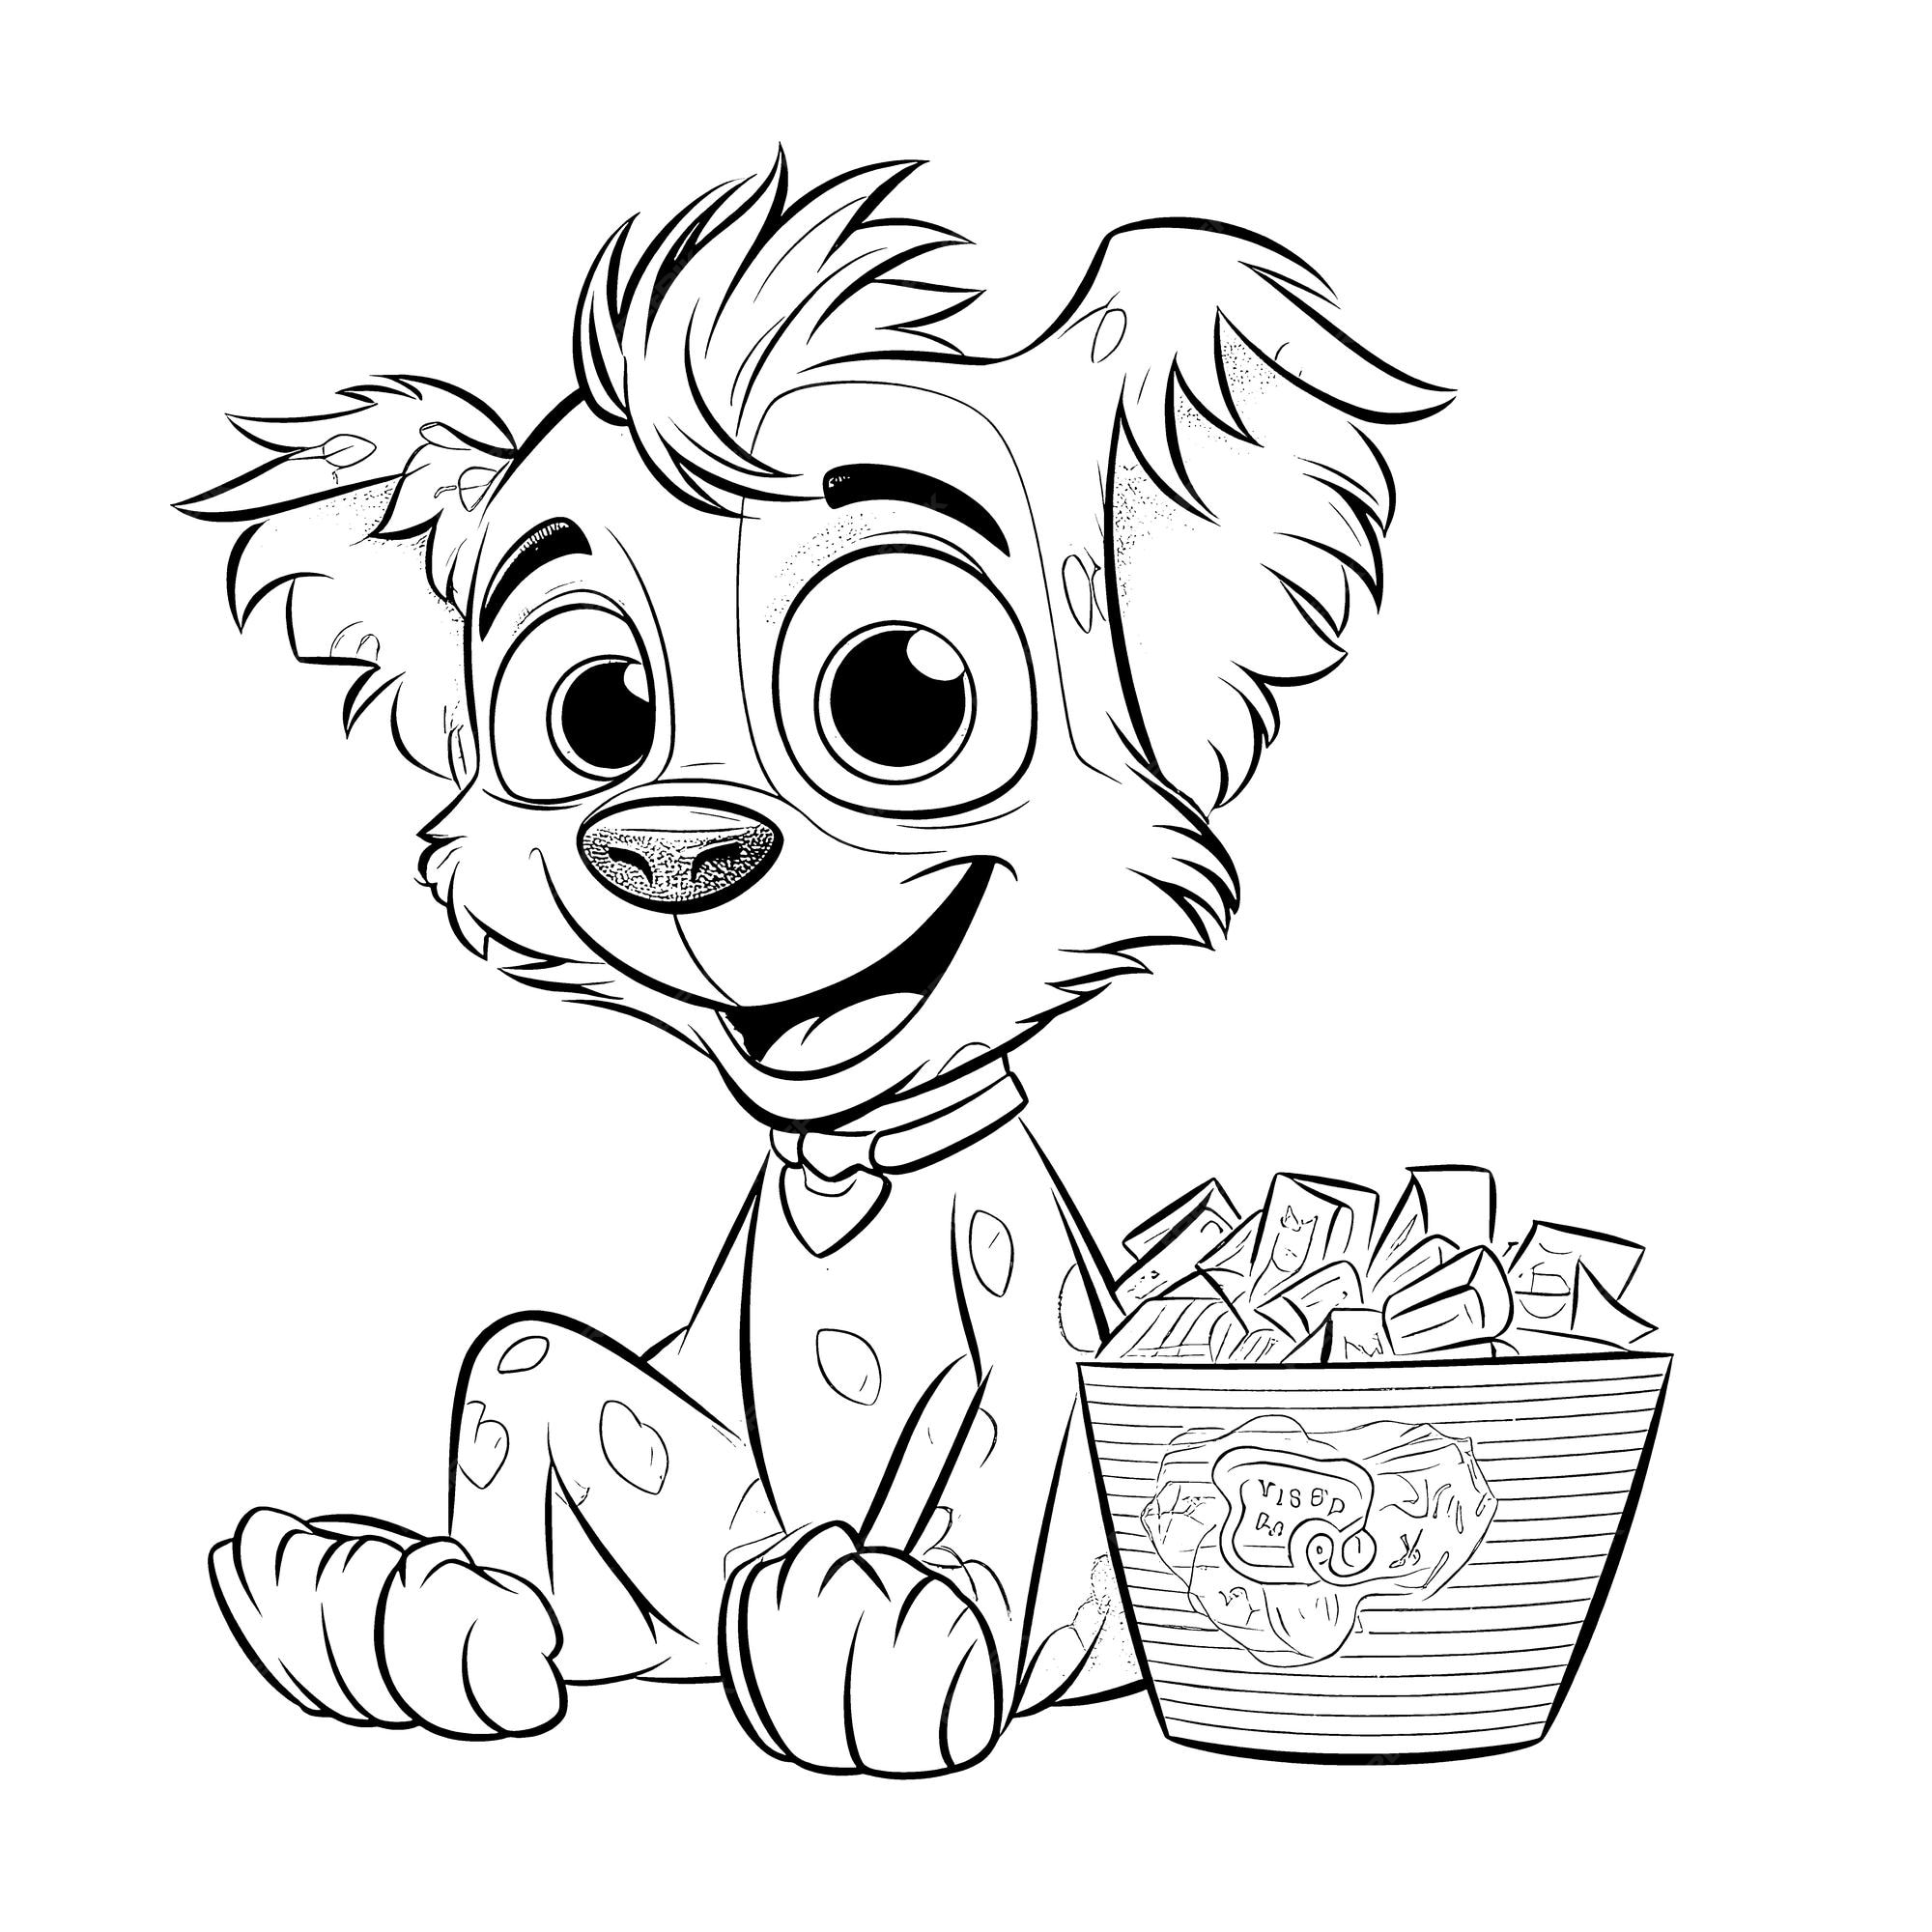 Premium vector dog black and white coloring pages for kids simple lines cartoon style happy cute funny animal in the world